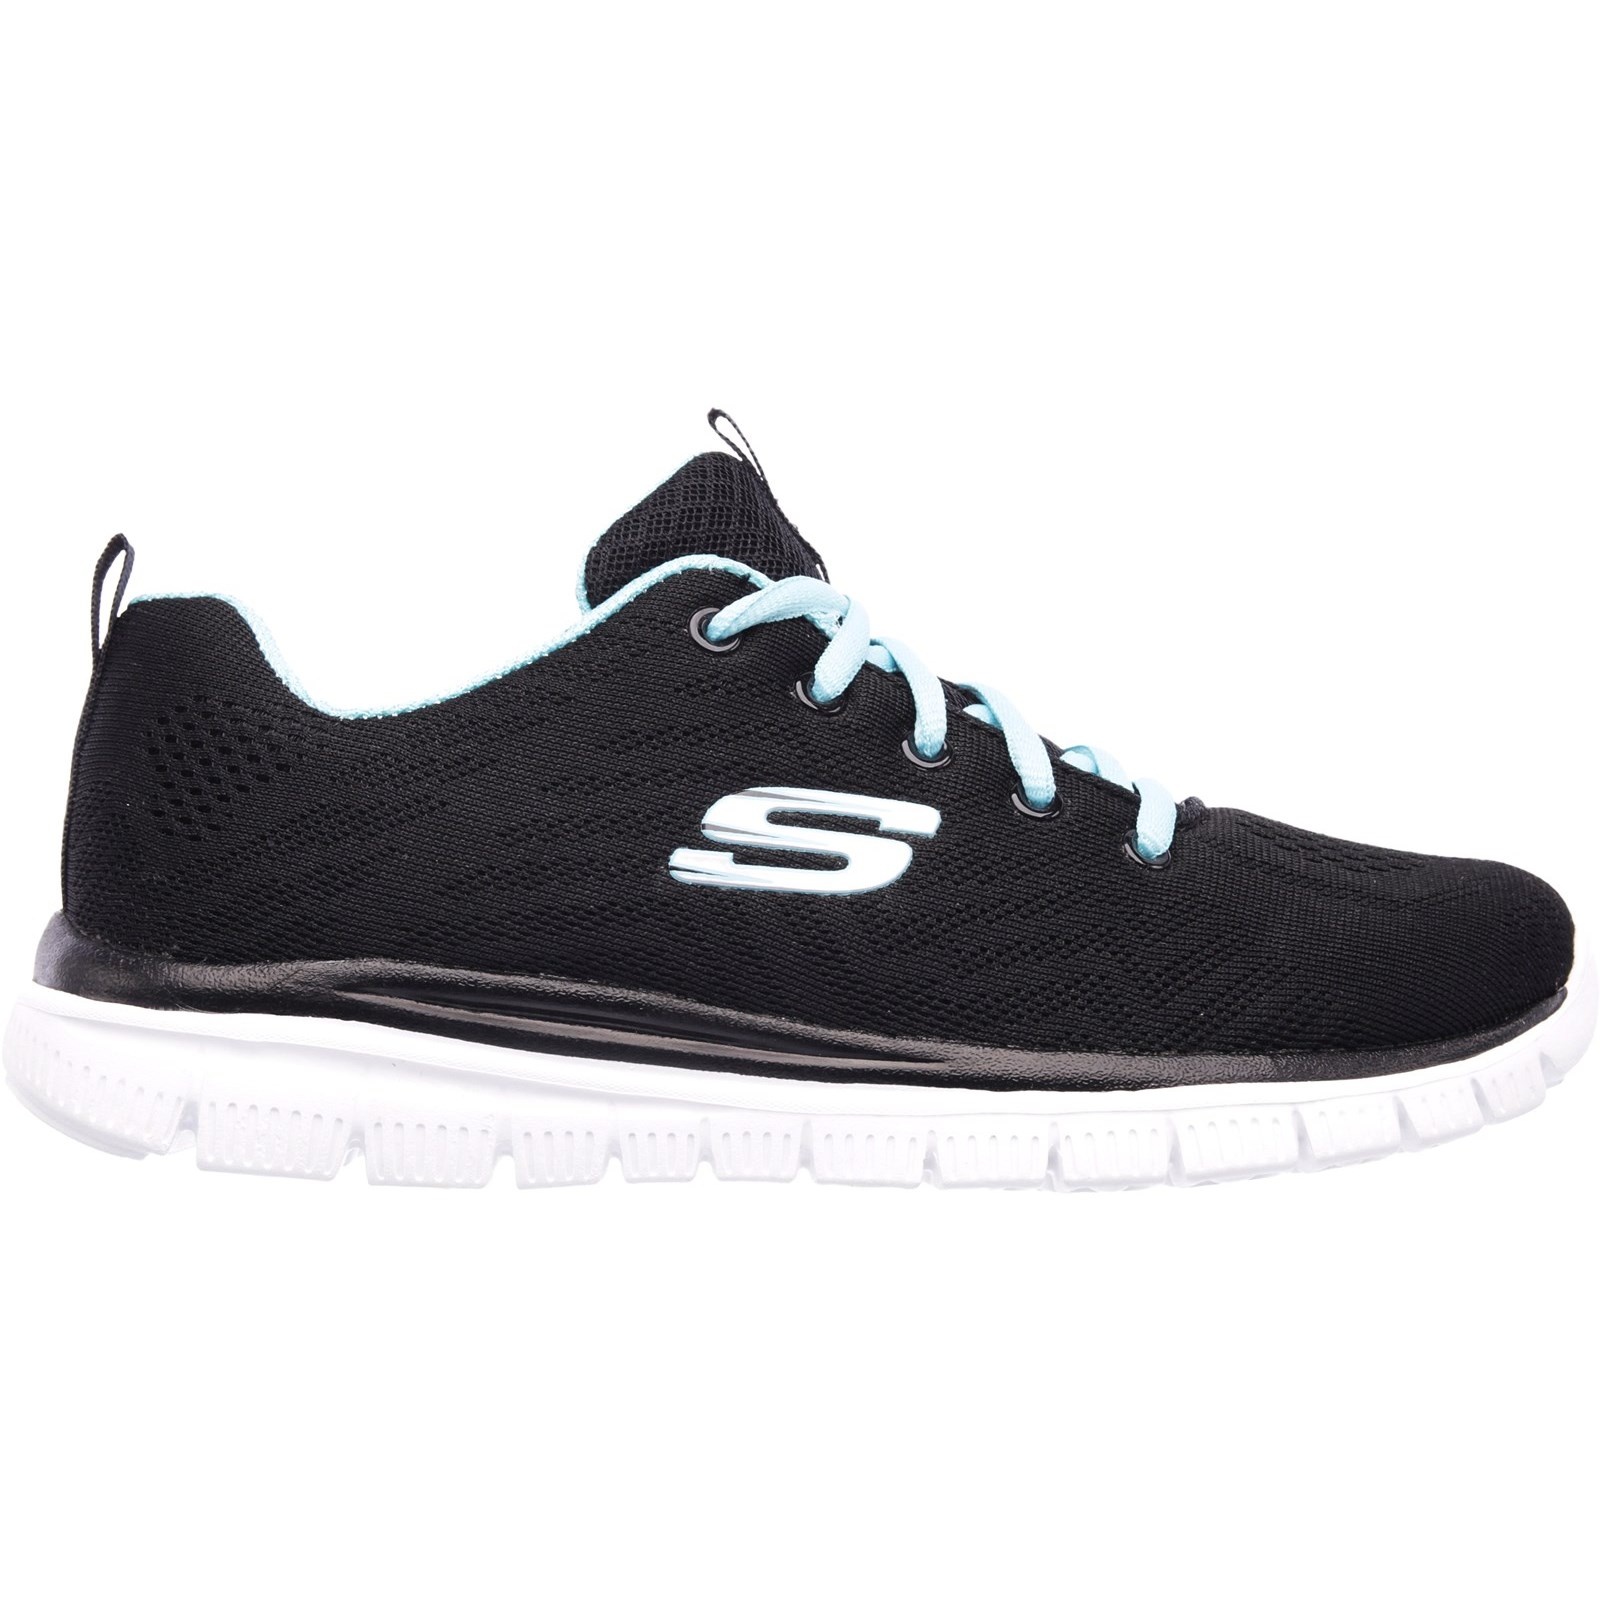 Skechers Graceful Get Connected Black/Turquoise